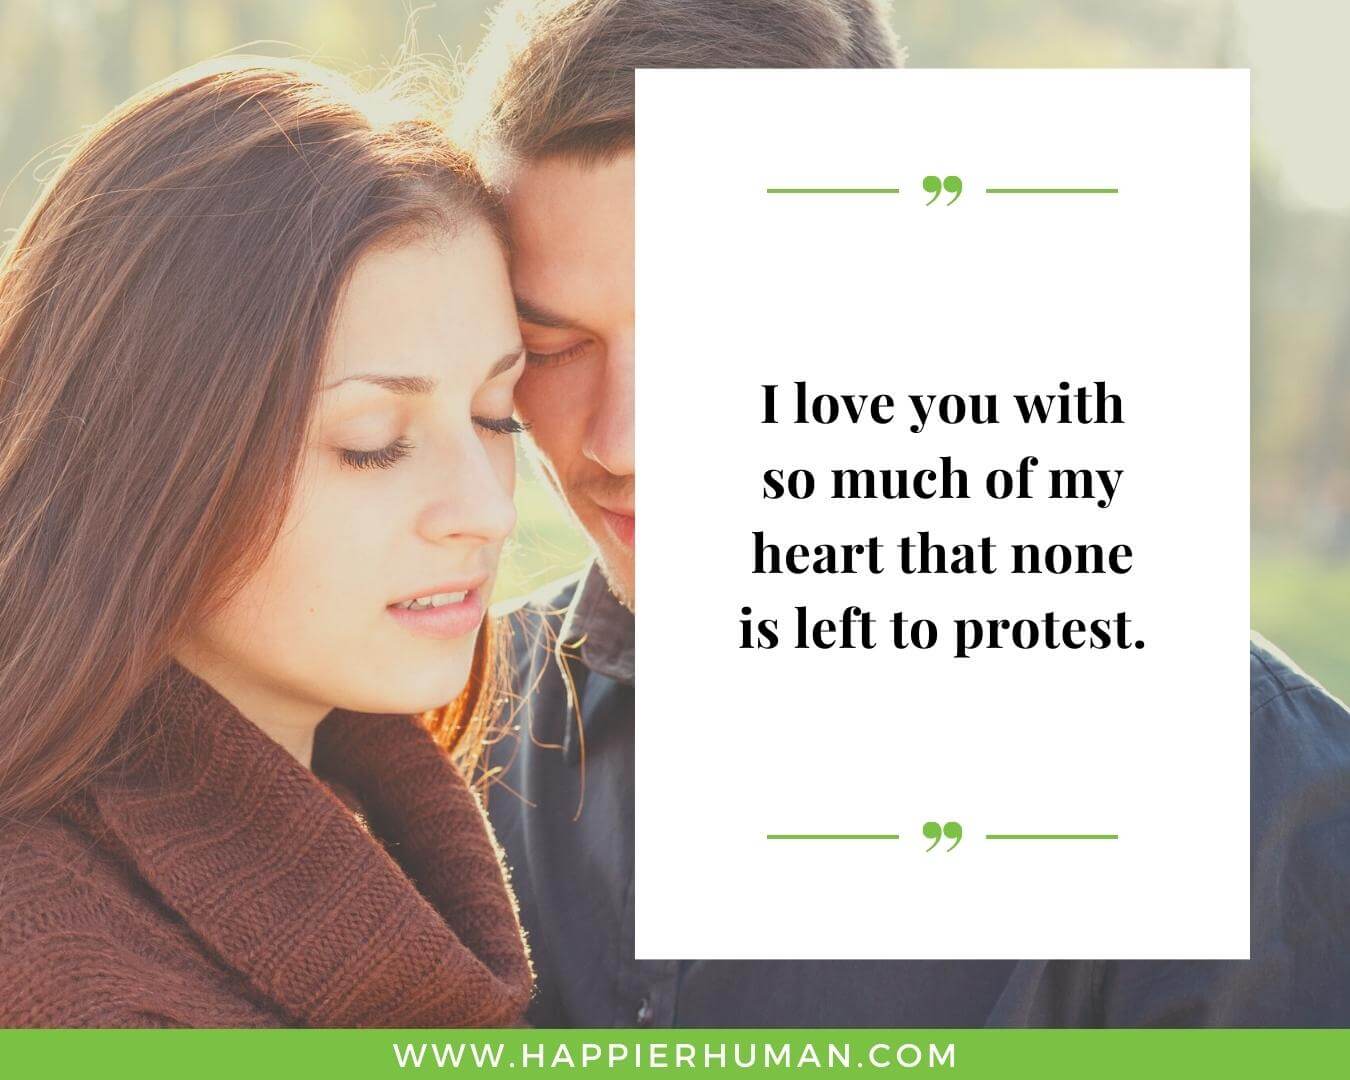 Deep Love Quotes - “I love you with so much of my heart that none is left to protest.”